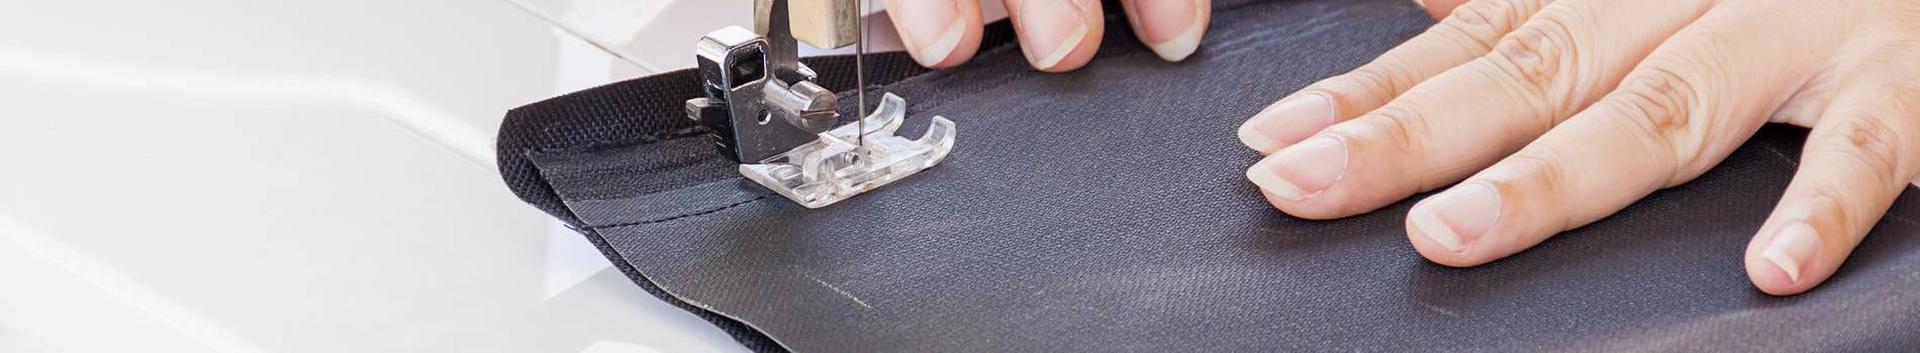 Sewing Industry and other related services, products, consultations